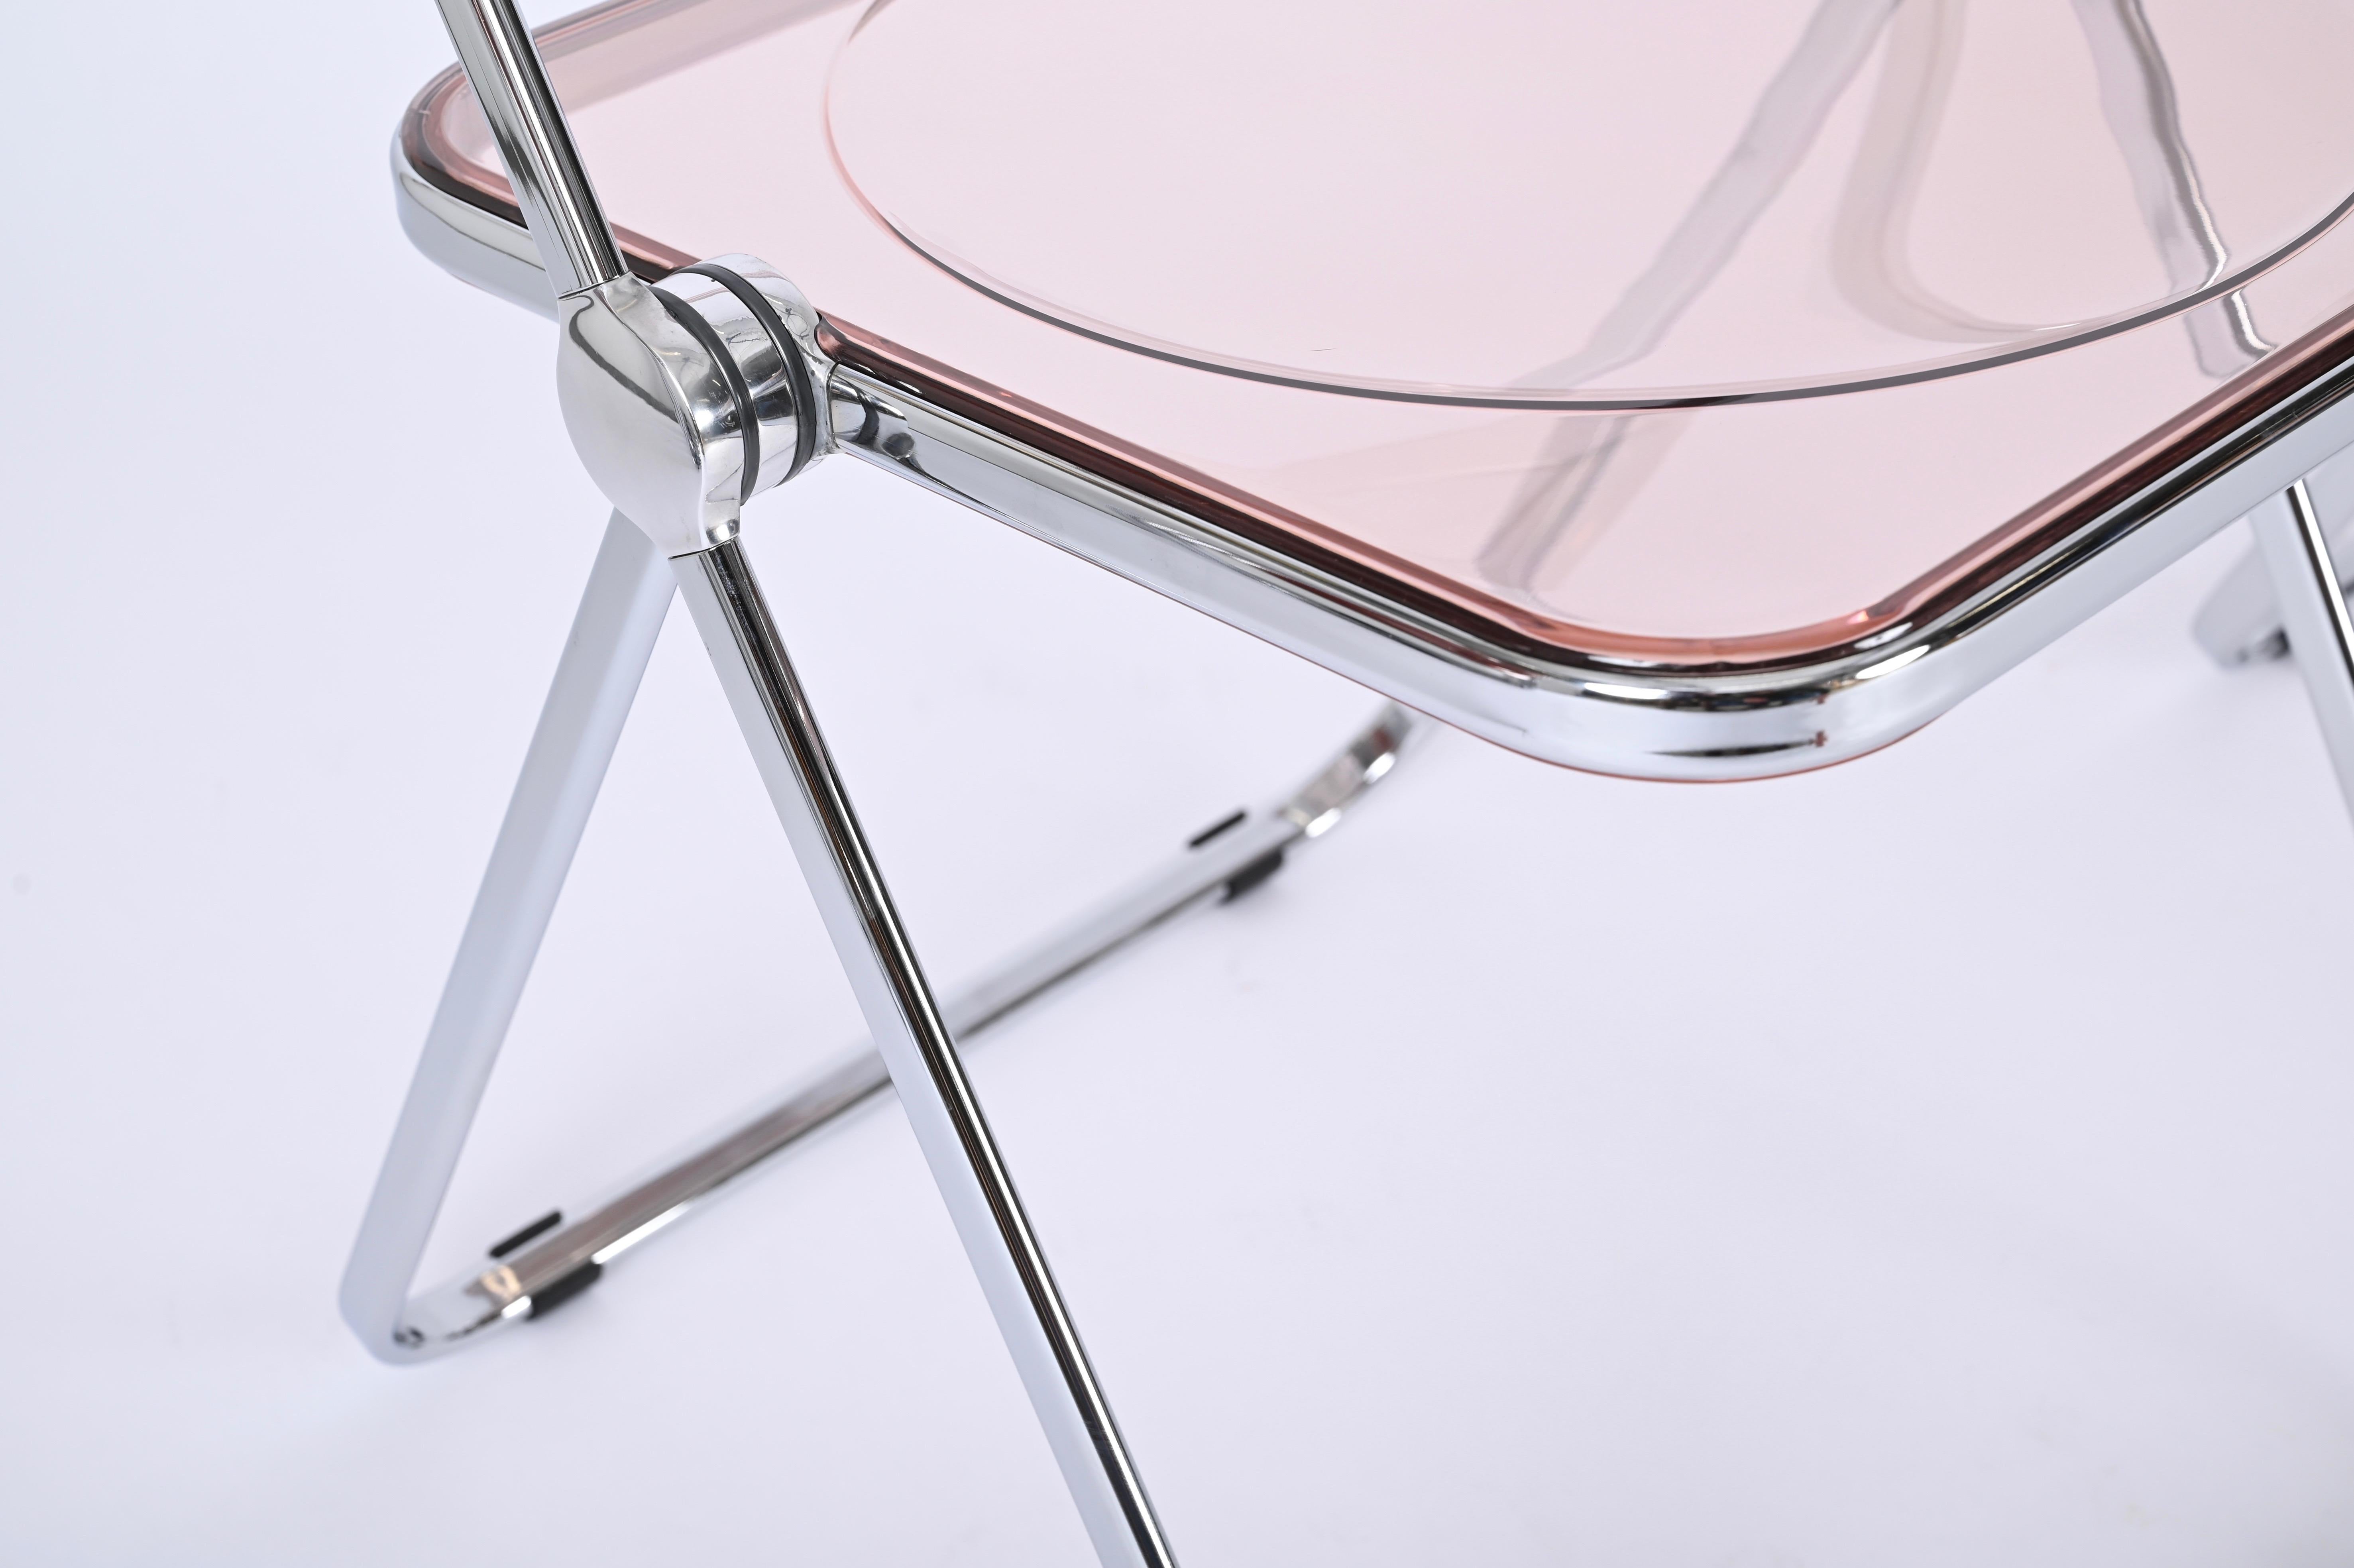 Set of 4 Lucite Pink and Chrome Plia Chairs, Piretti for Castelli, Italy 1970s For Sale 3